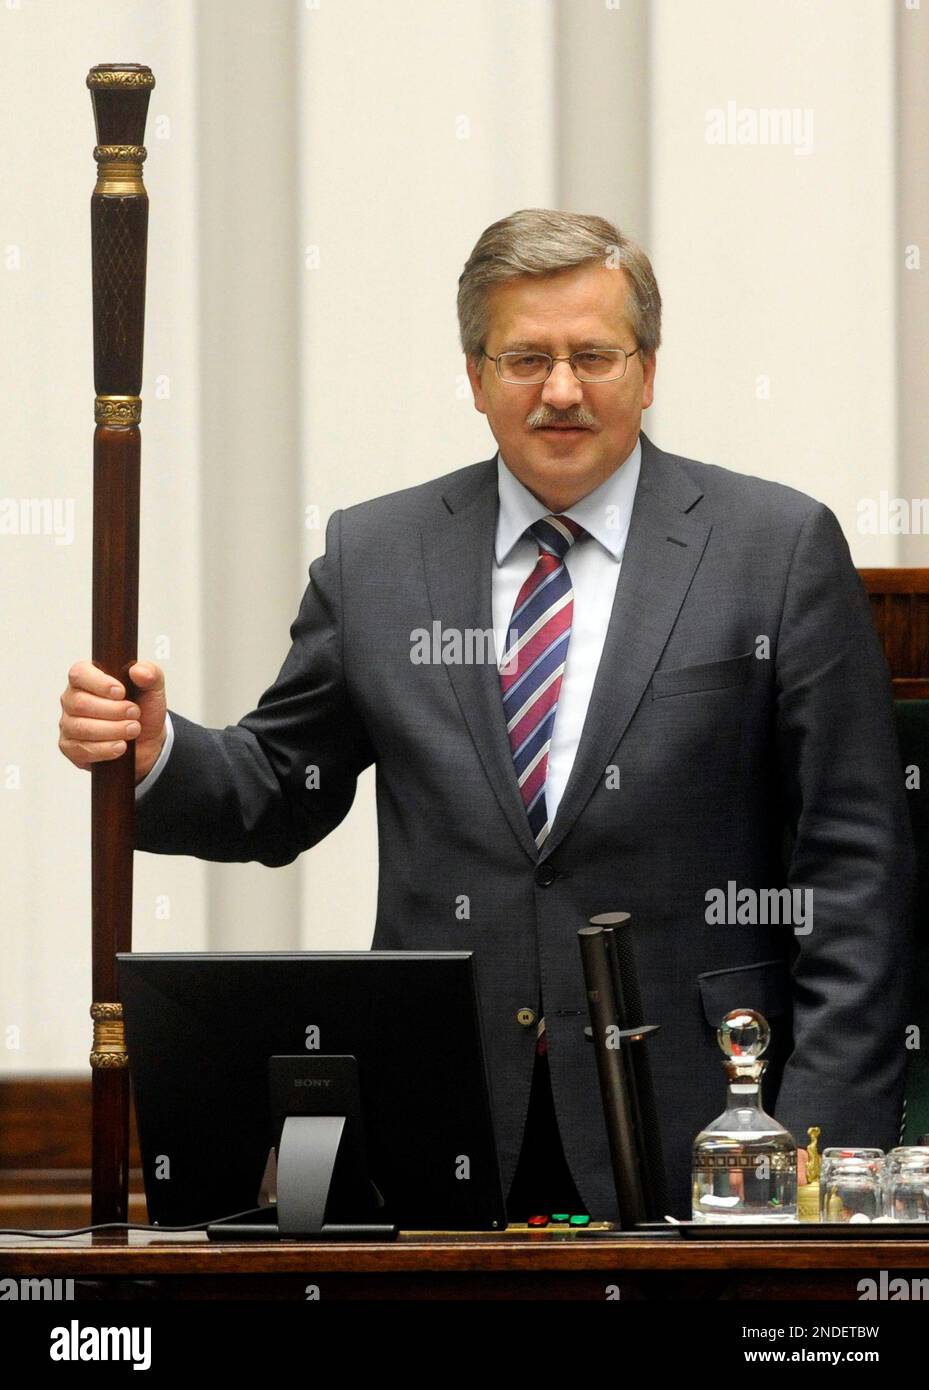 Poland's President-elect Bronislaw Komorowski, also Parliament Speaker and acting president, opens his last session as parliament speaker at the parliament in Warsaw, Poland, Wednesday, July 7, 2010. Komorowski announced he will resign Thursday morning from his parliament speaker's post. (AP Photo/Alik Keplicz) Stock Photo